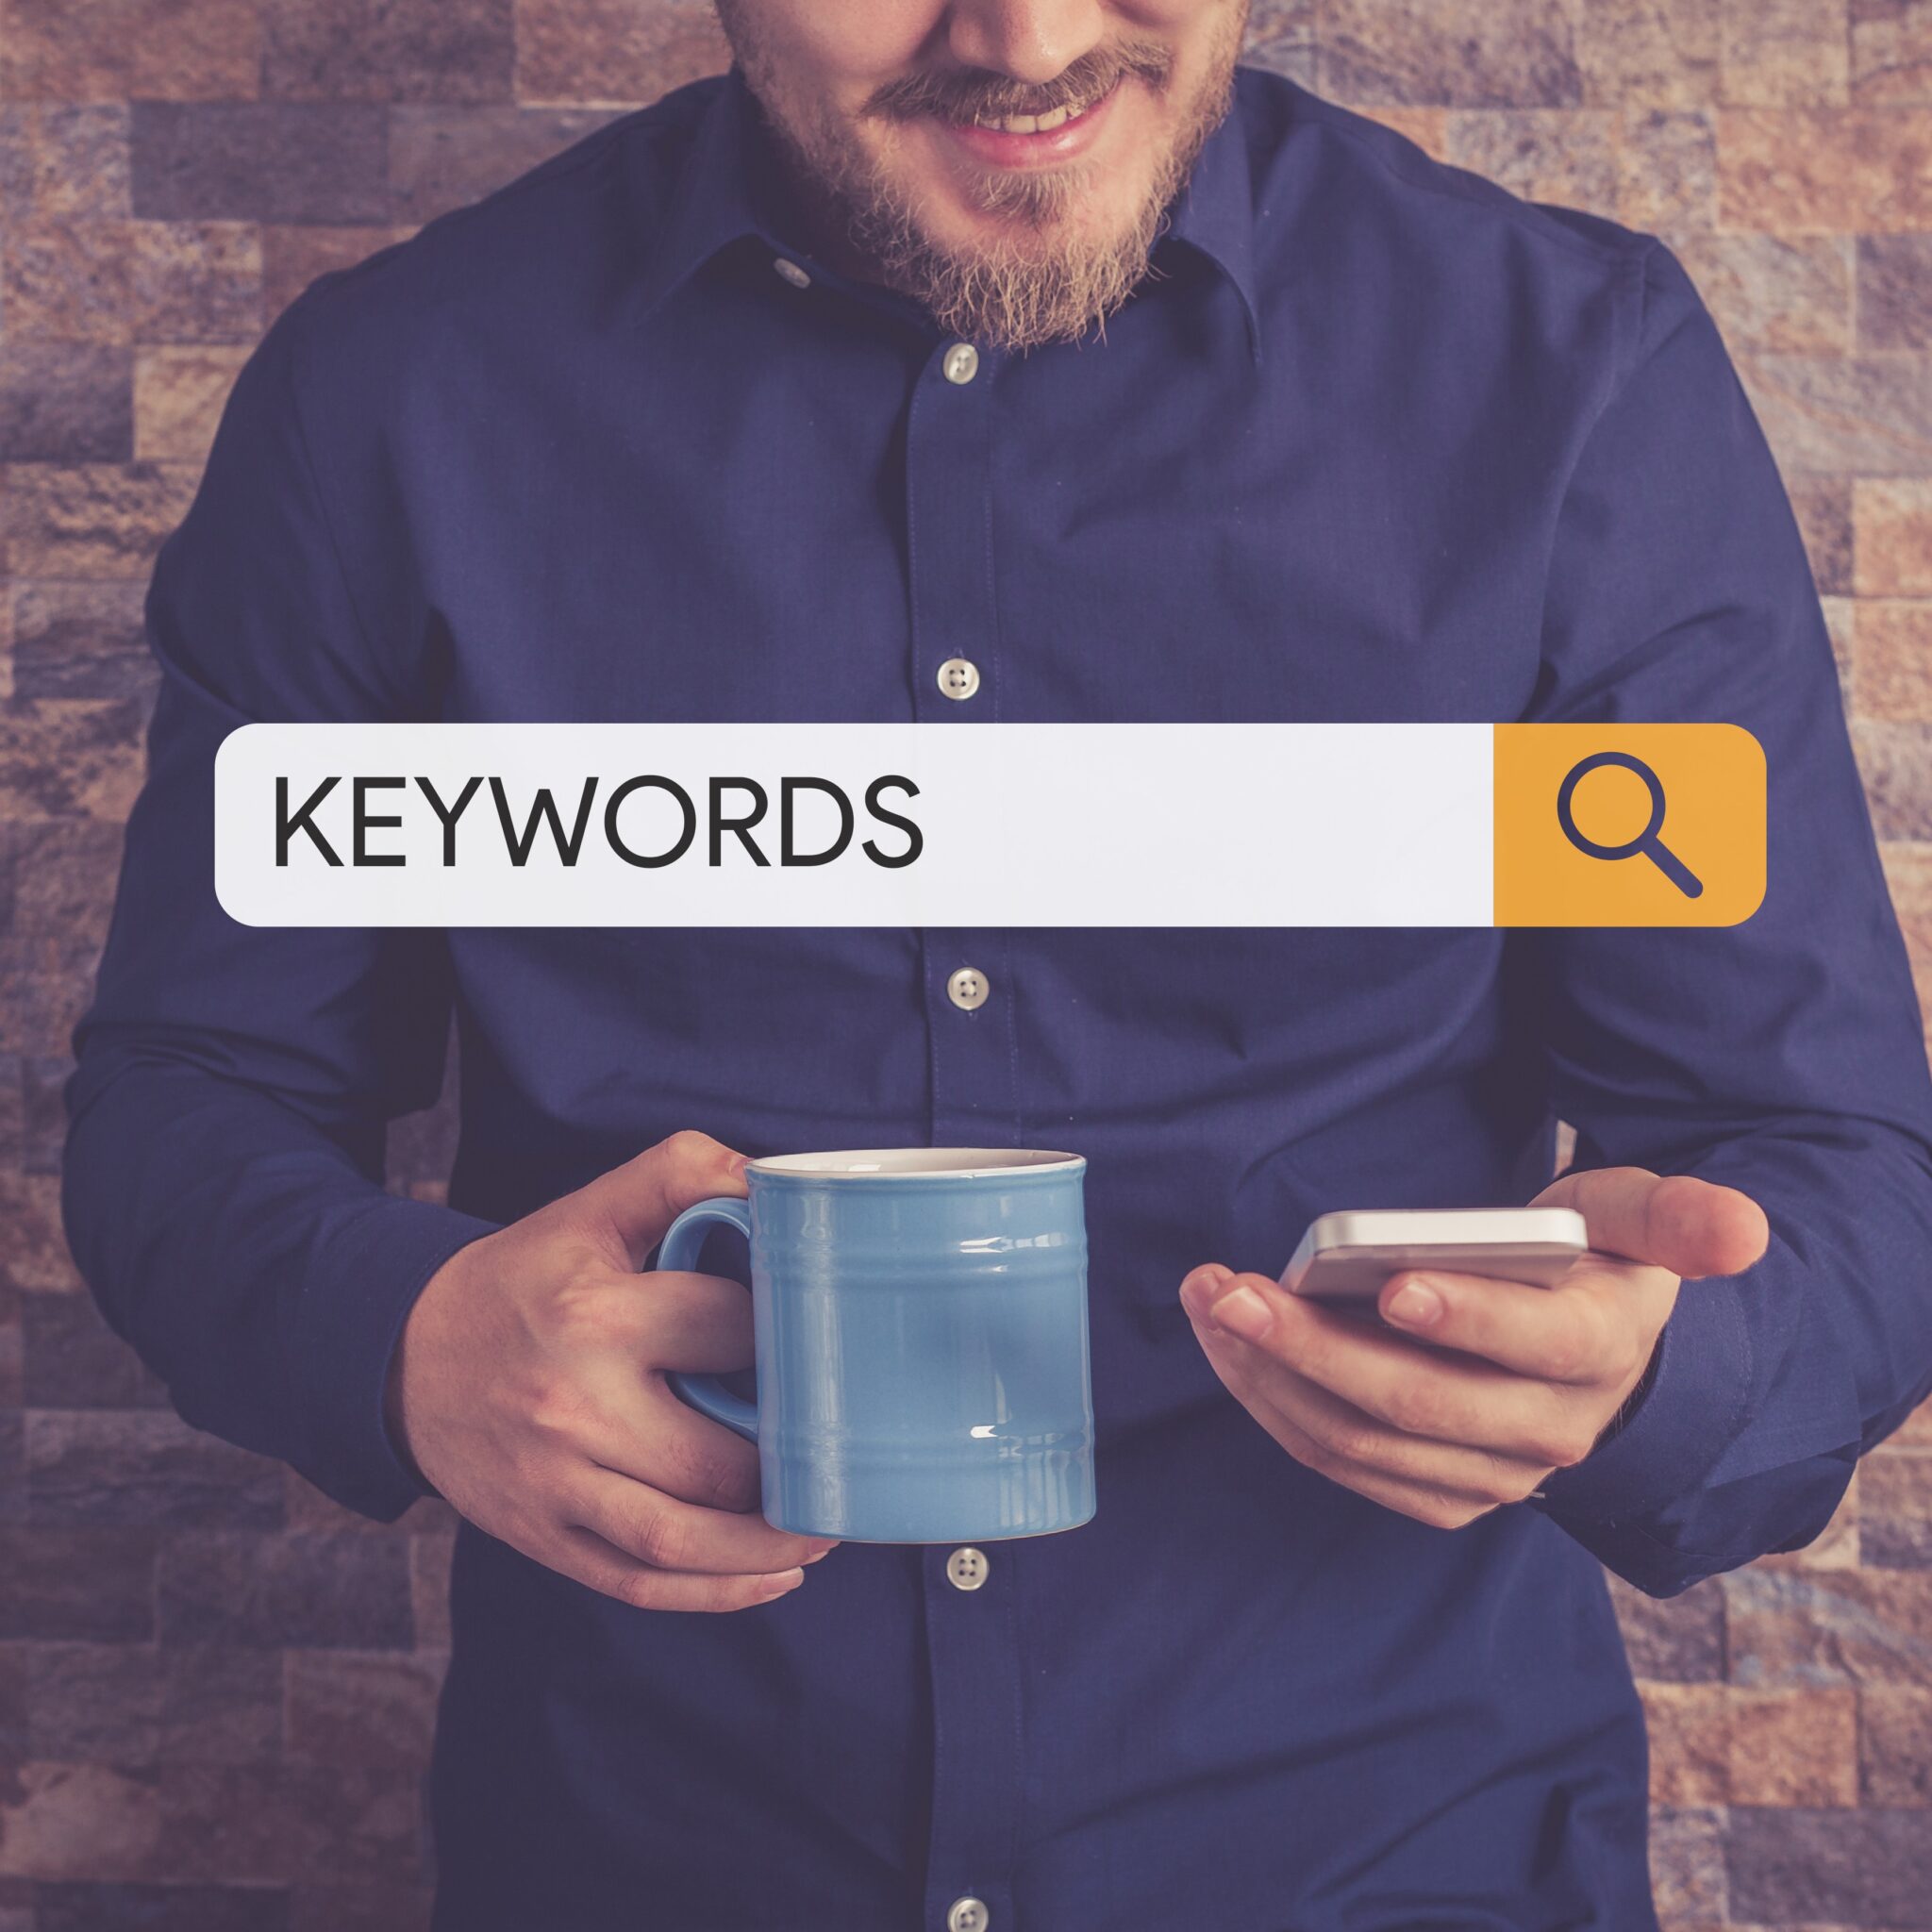 Man holding his phone and a mug searches for keywords